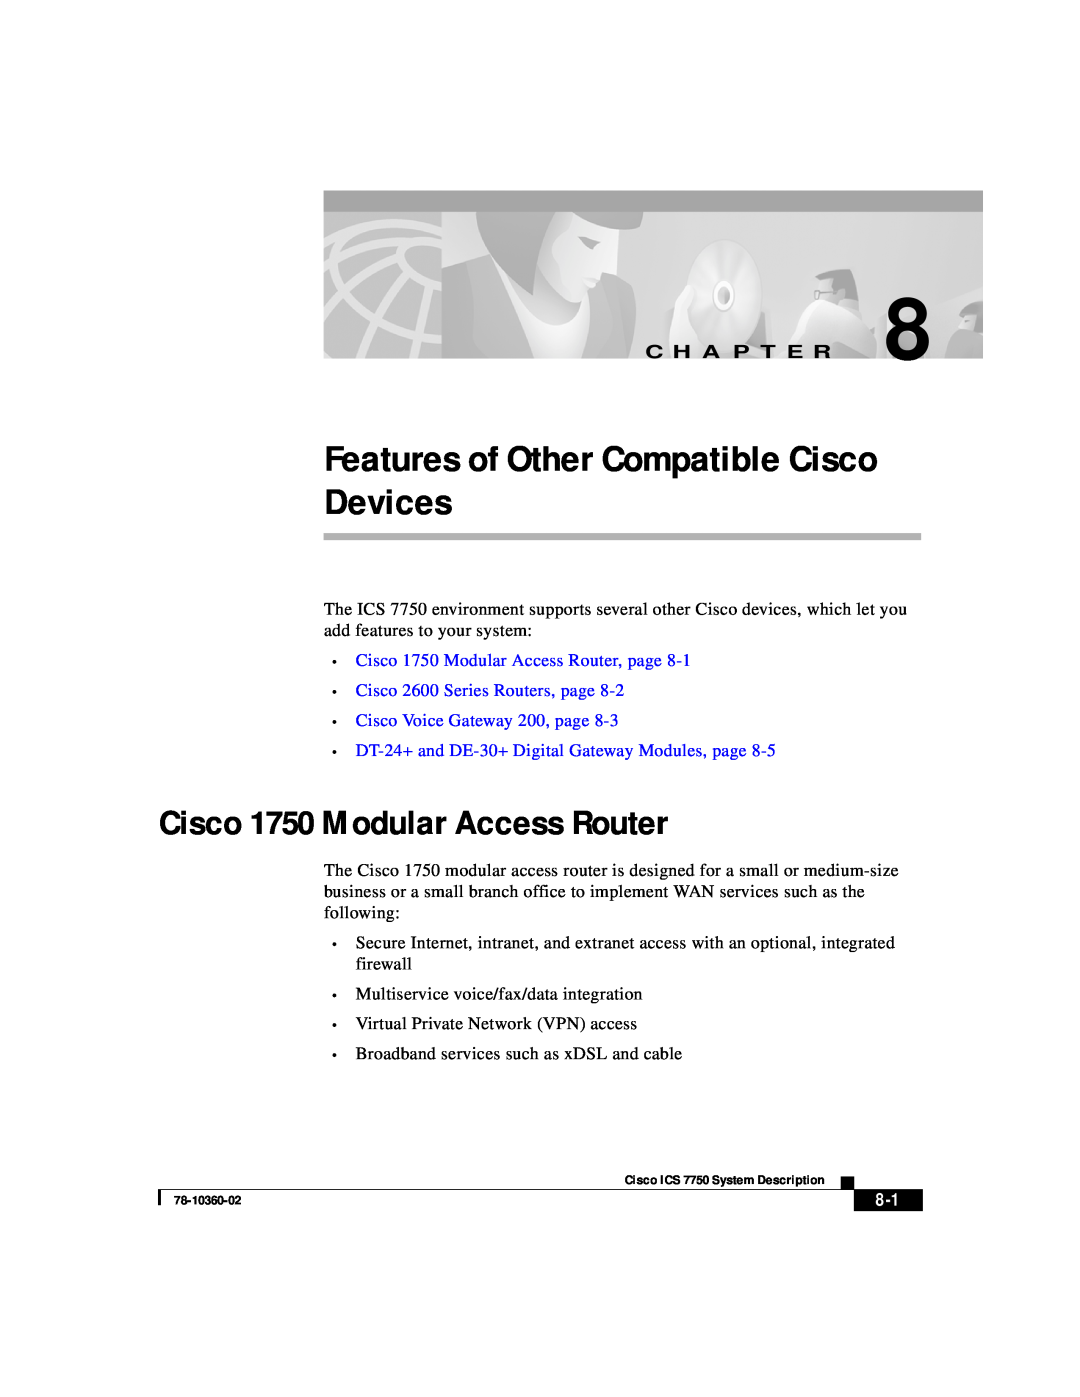 Cisco Systems ICS-7750 manual Devices, Features of Other Compatible Cisco, Cisco 1750 Modular Access Router, C H A P T E R 